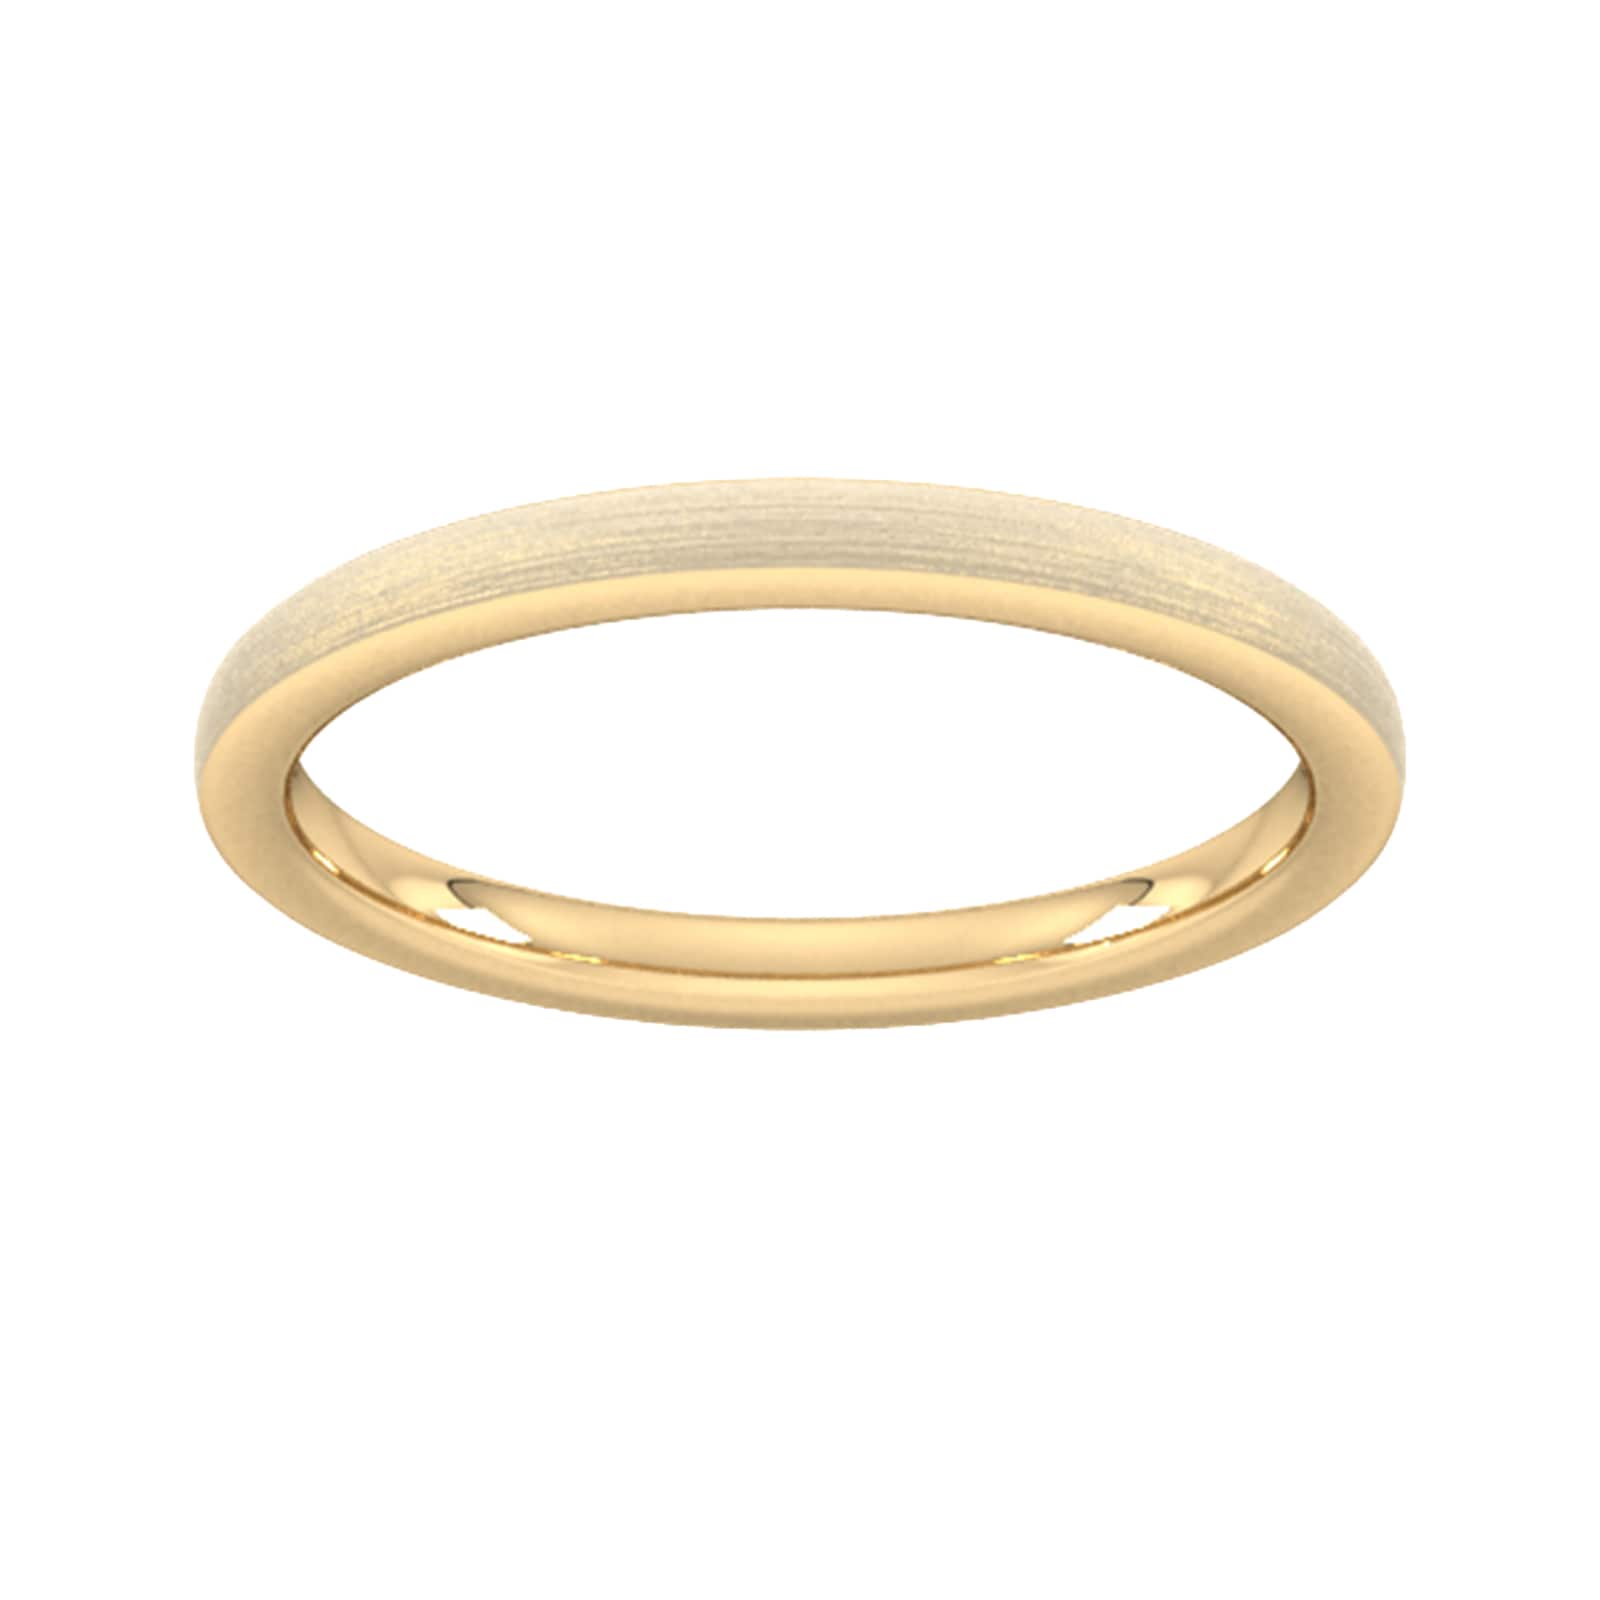 2mm Traditional Court Standard Polished Chamfered Edges With Matt Centre Wedding Ring In 18 Carat Yellow Gold - Ring Size L